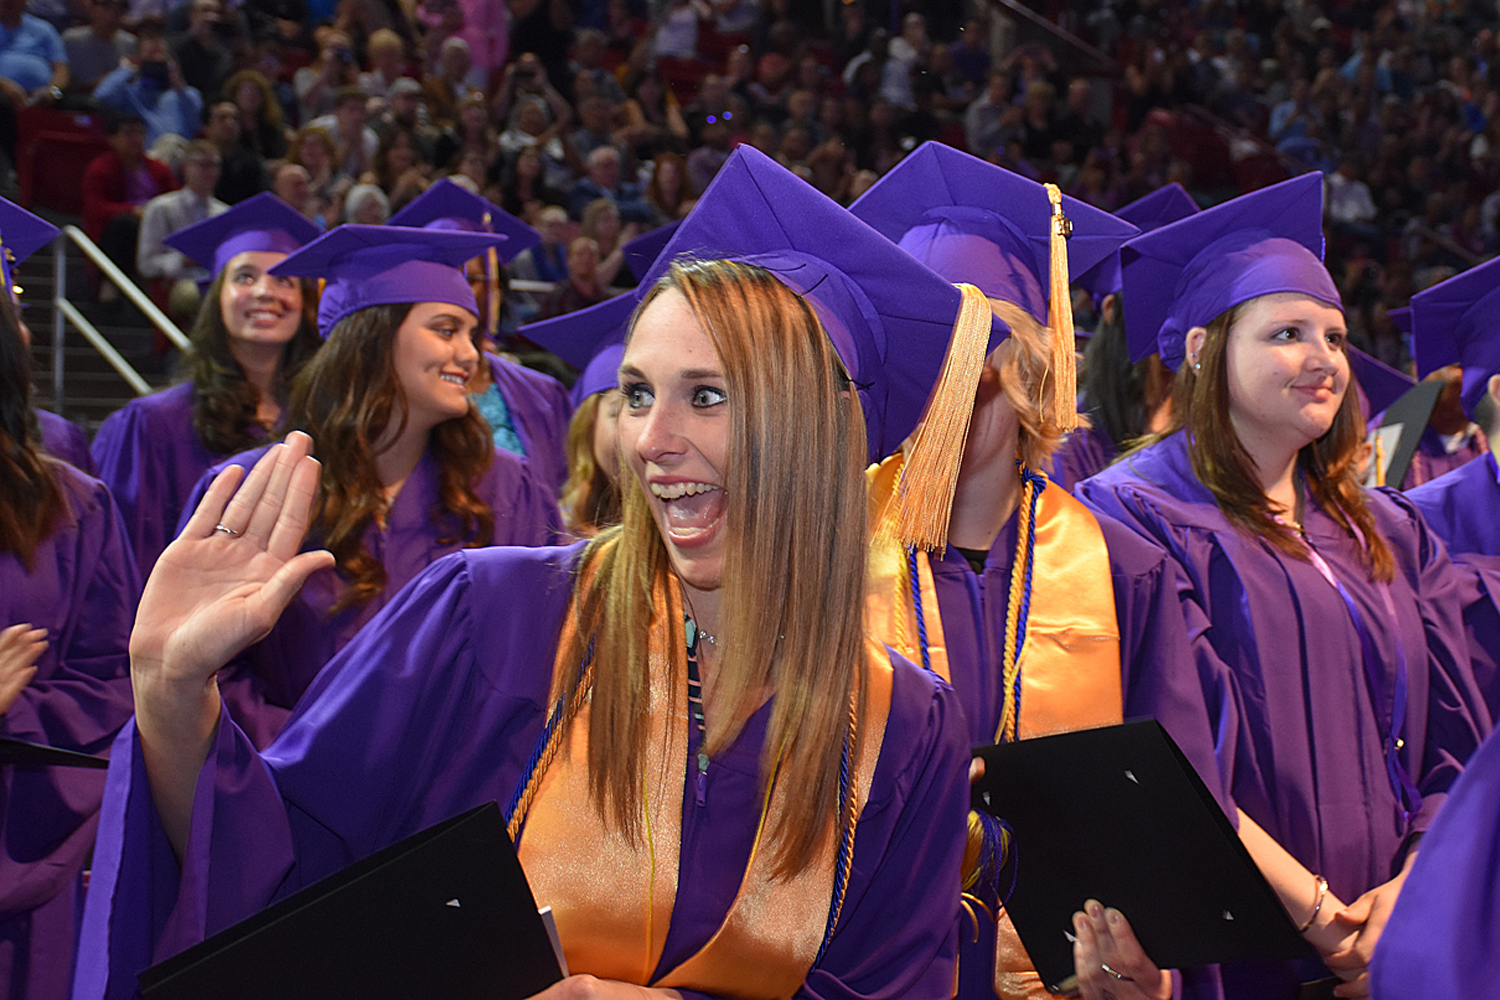 woman in purple cap and gown and gold sash receives a high five in celebration